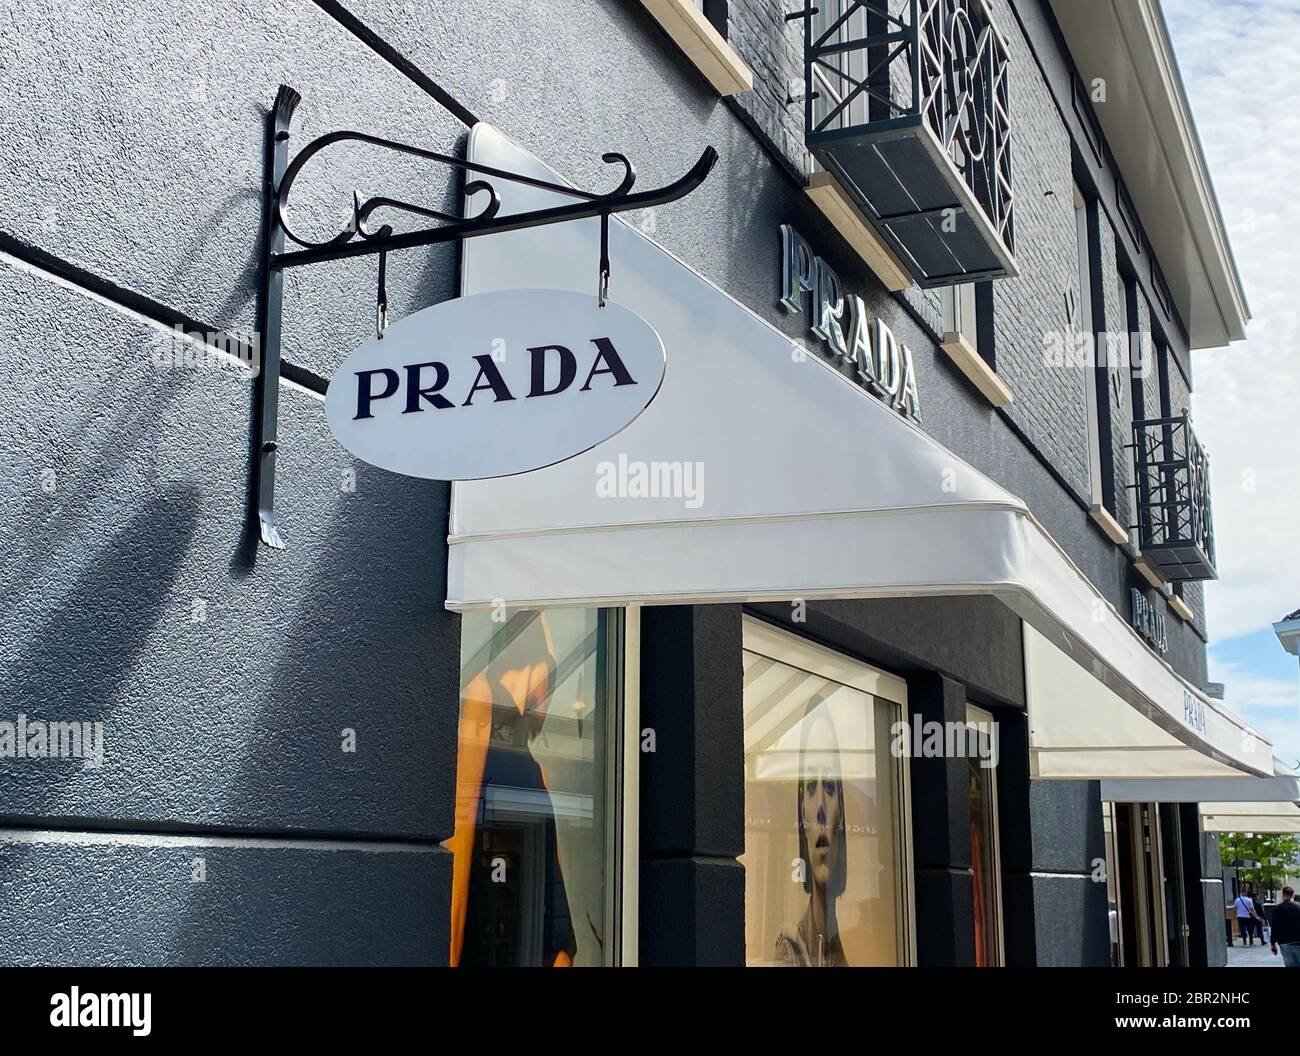 Roermond, Netherlands - May 19. 2020: View on facade with logo lettering of  Prada fashion company at shop entrance Stock Photo - Alamy